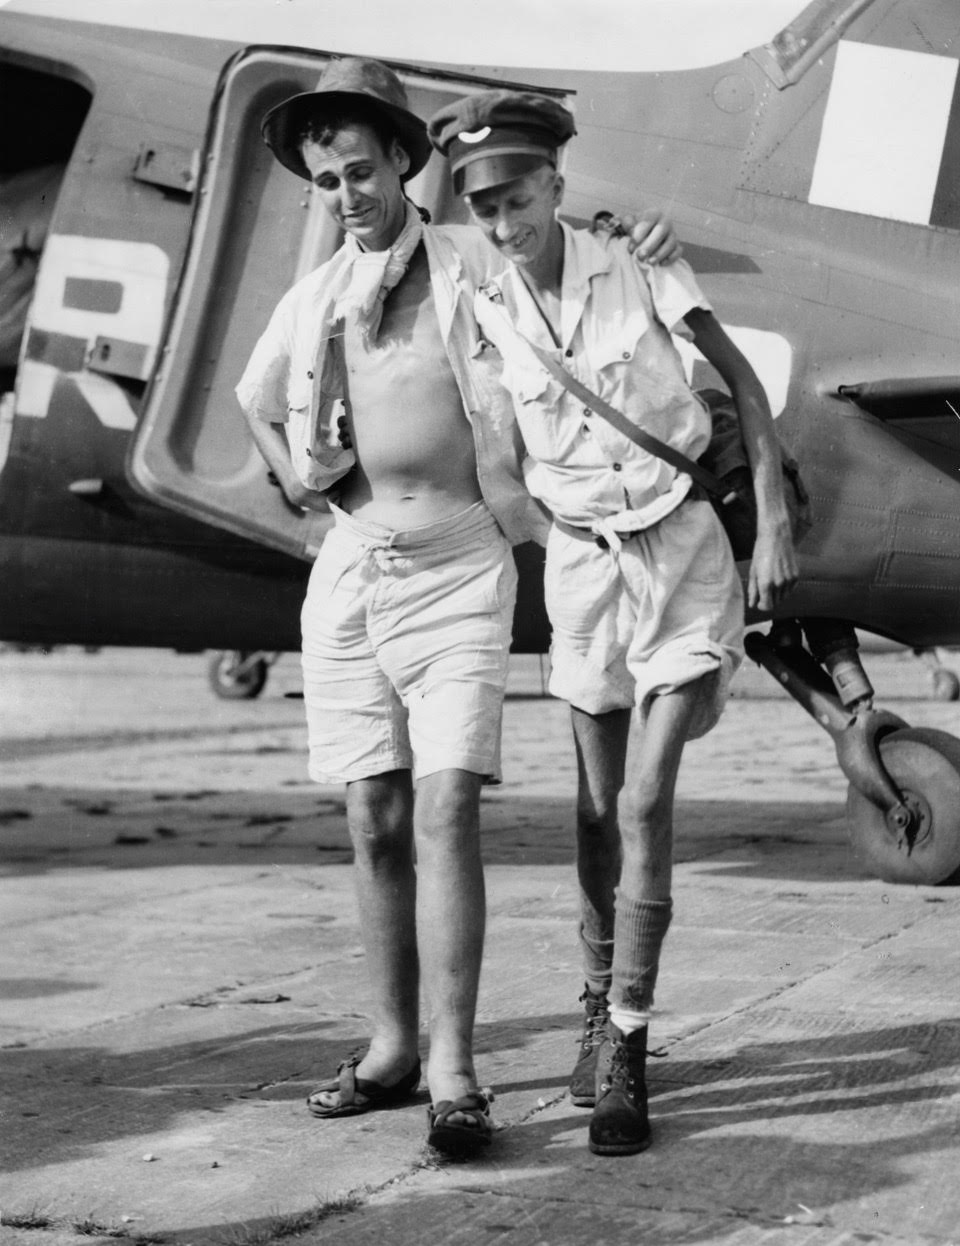 Keith (right) with George Coatsworth at Singapore civil airport; they’ve just stepped on to the tarmac following a flight from Sumatra where they had been POWs, 17 September 1945 